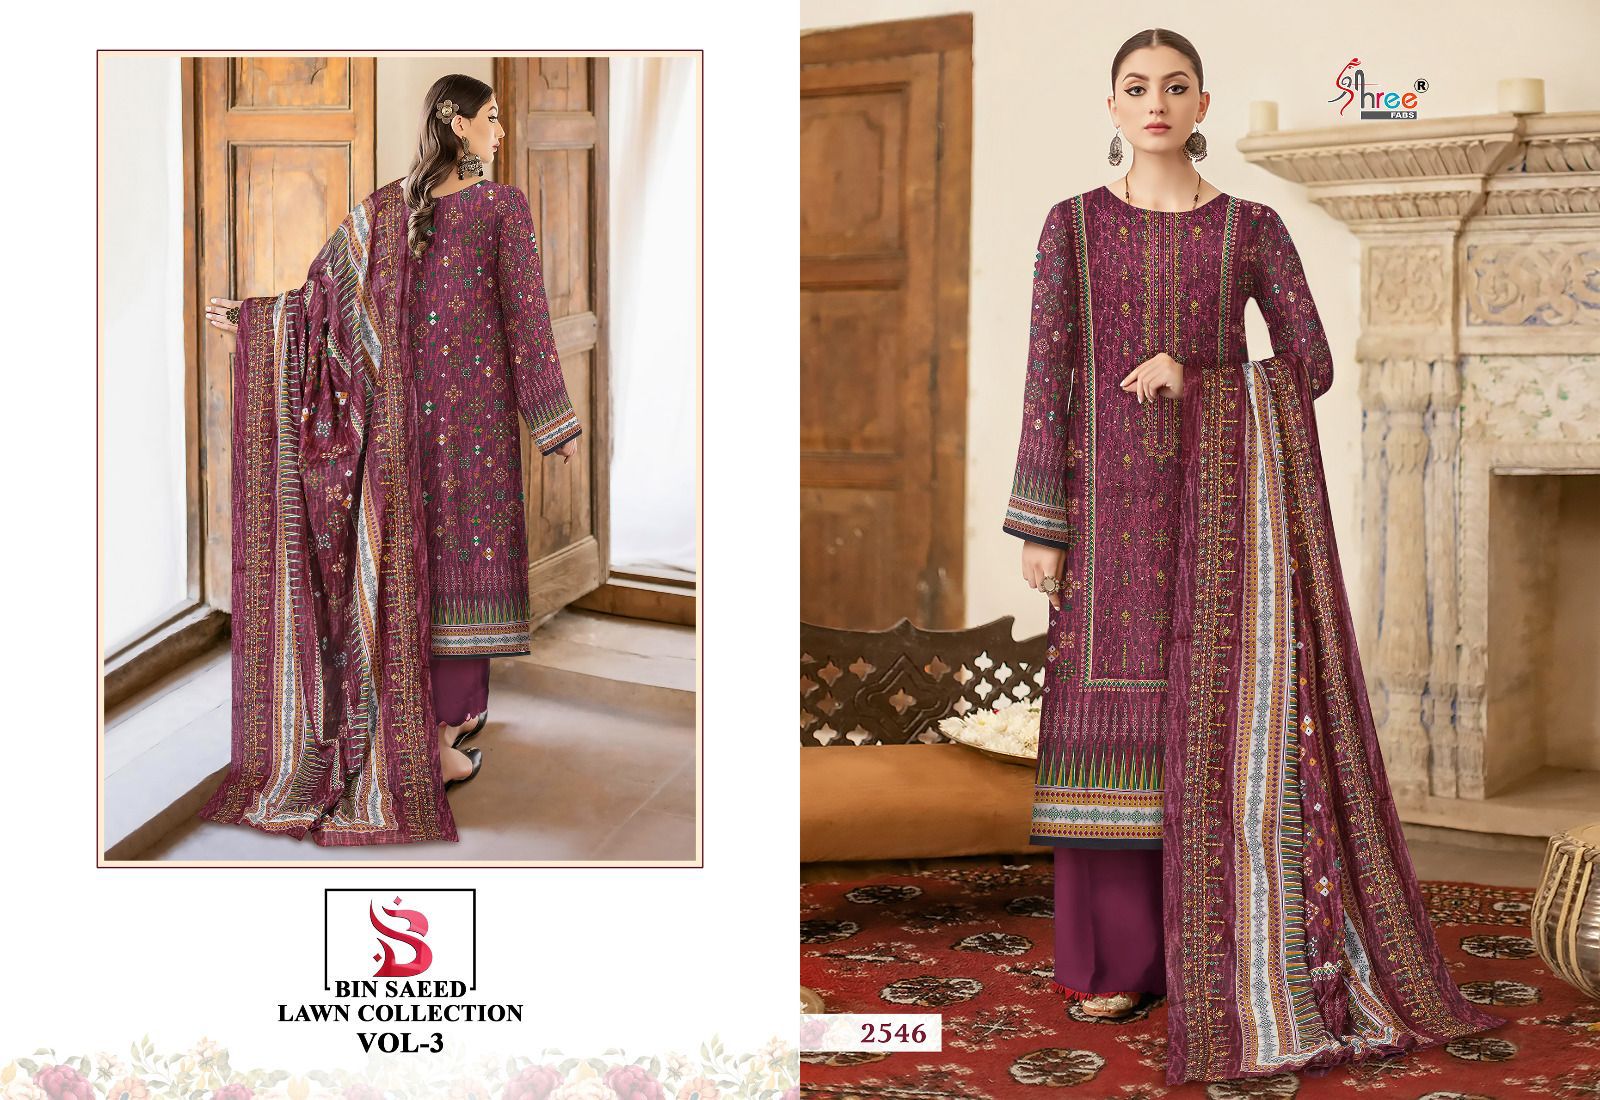 Shree Bin Saeed Lawn Collection Vol 3 collection 2